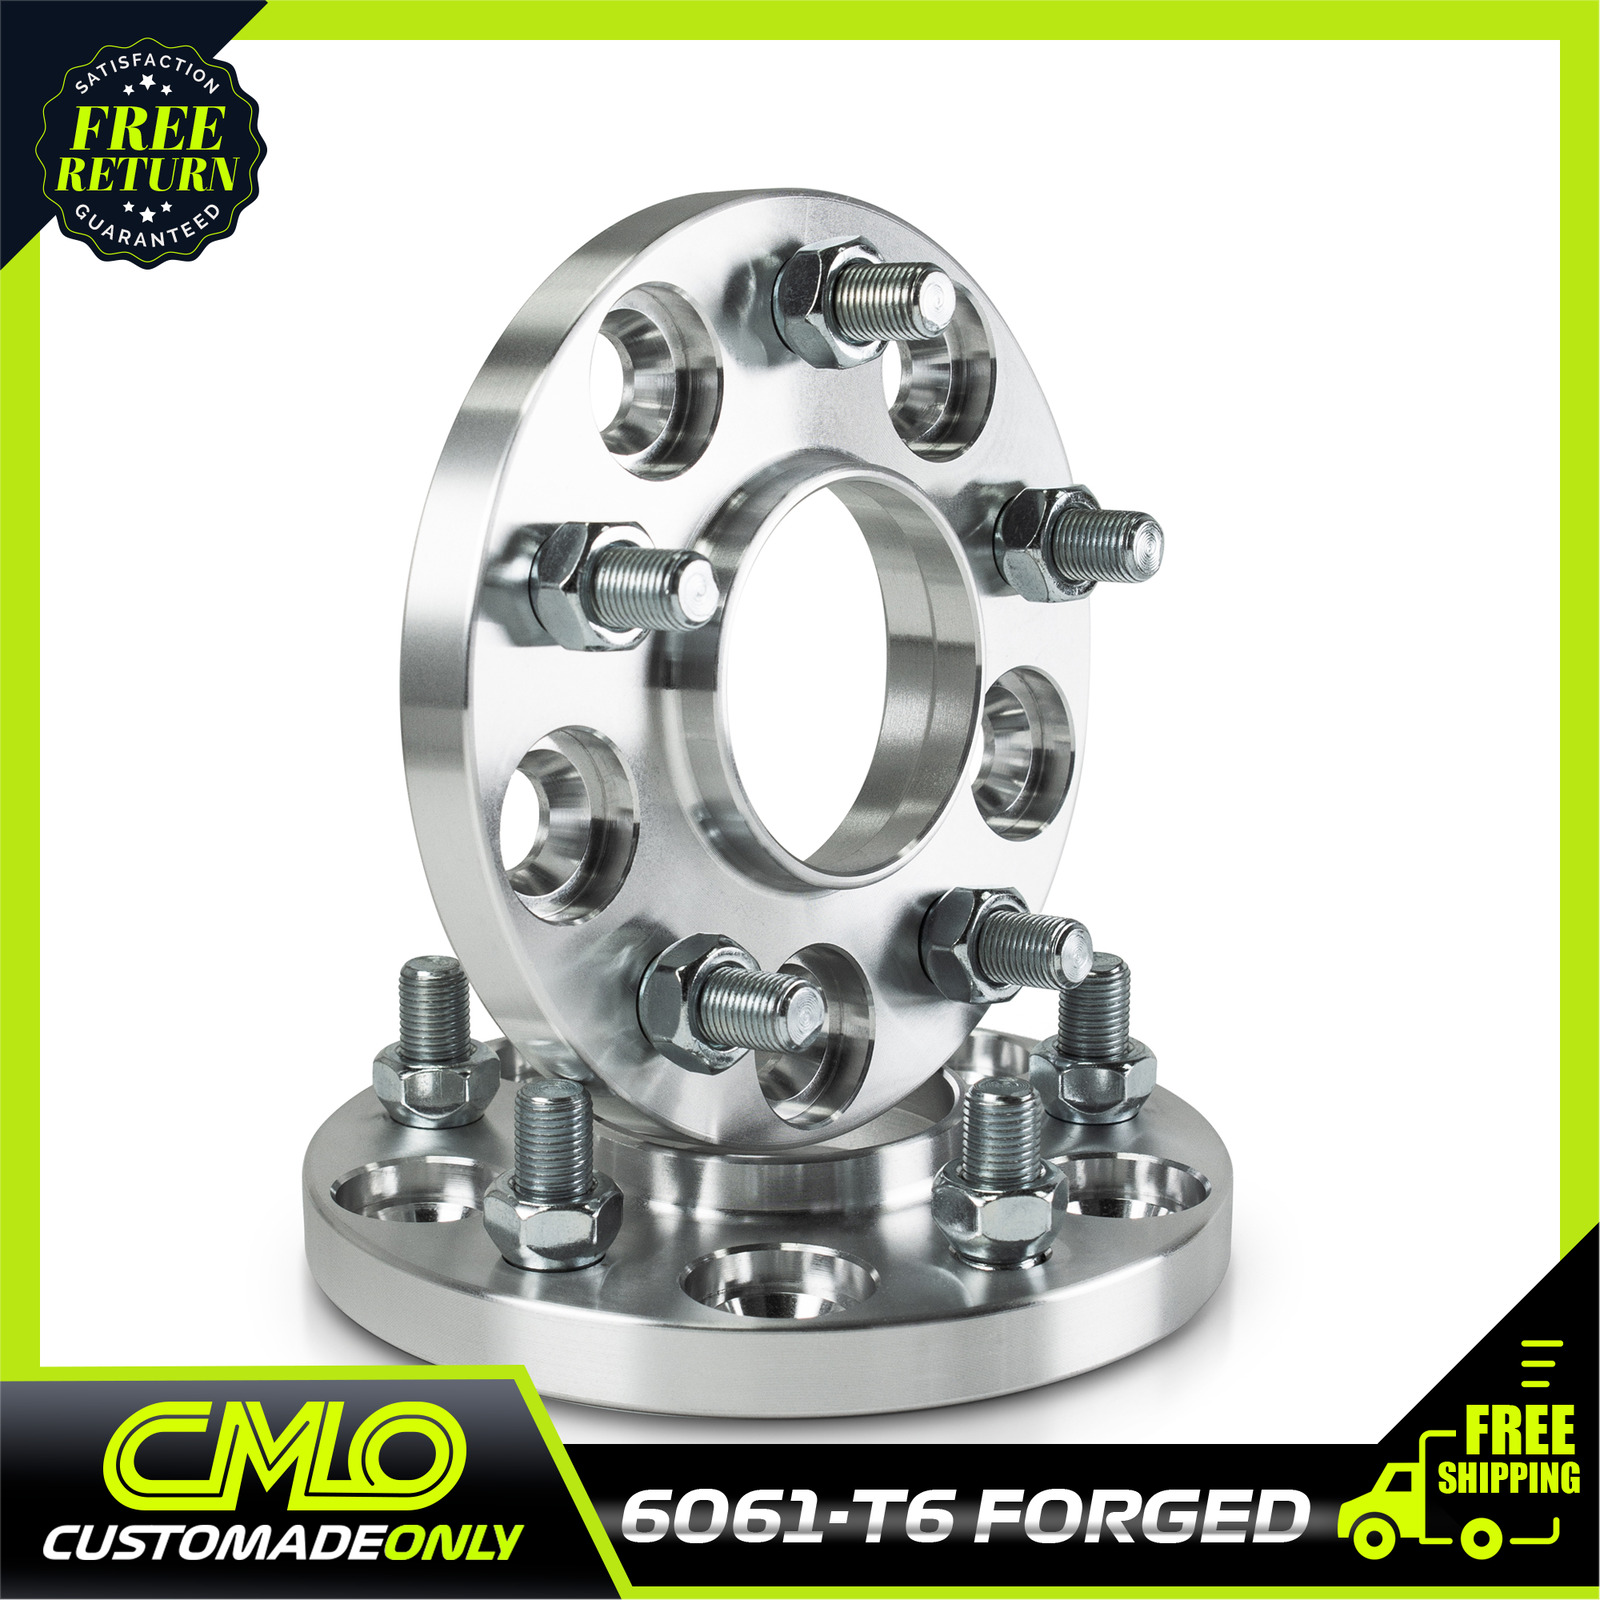 2pc 15mm Wheel Spacers 5x4.5 Fits IS250 IS300 IS350 GS300 GS350 GS460 Camry RAV4